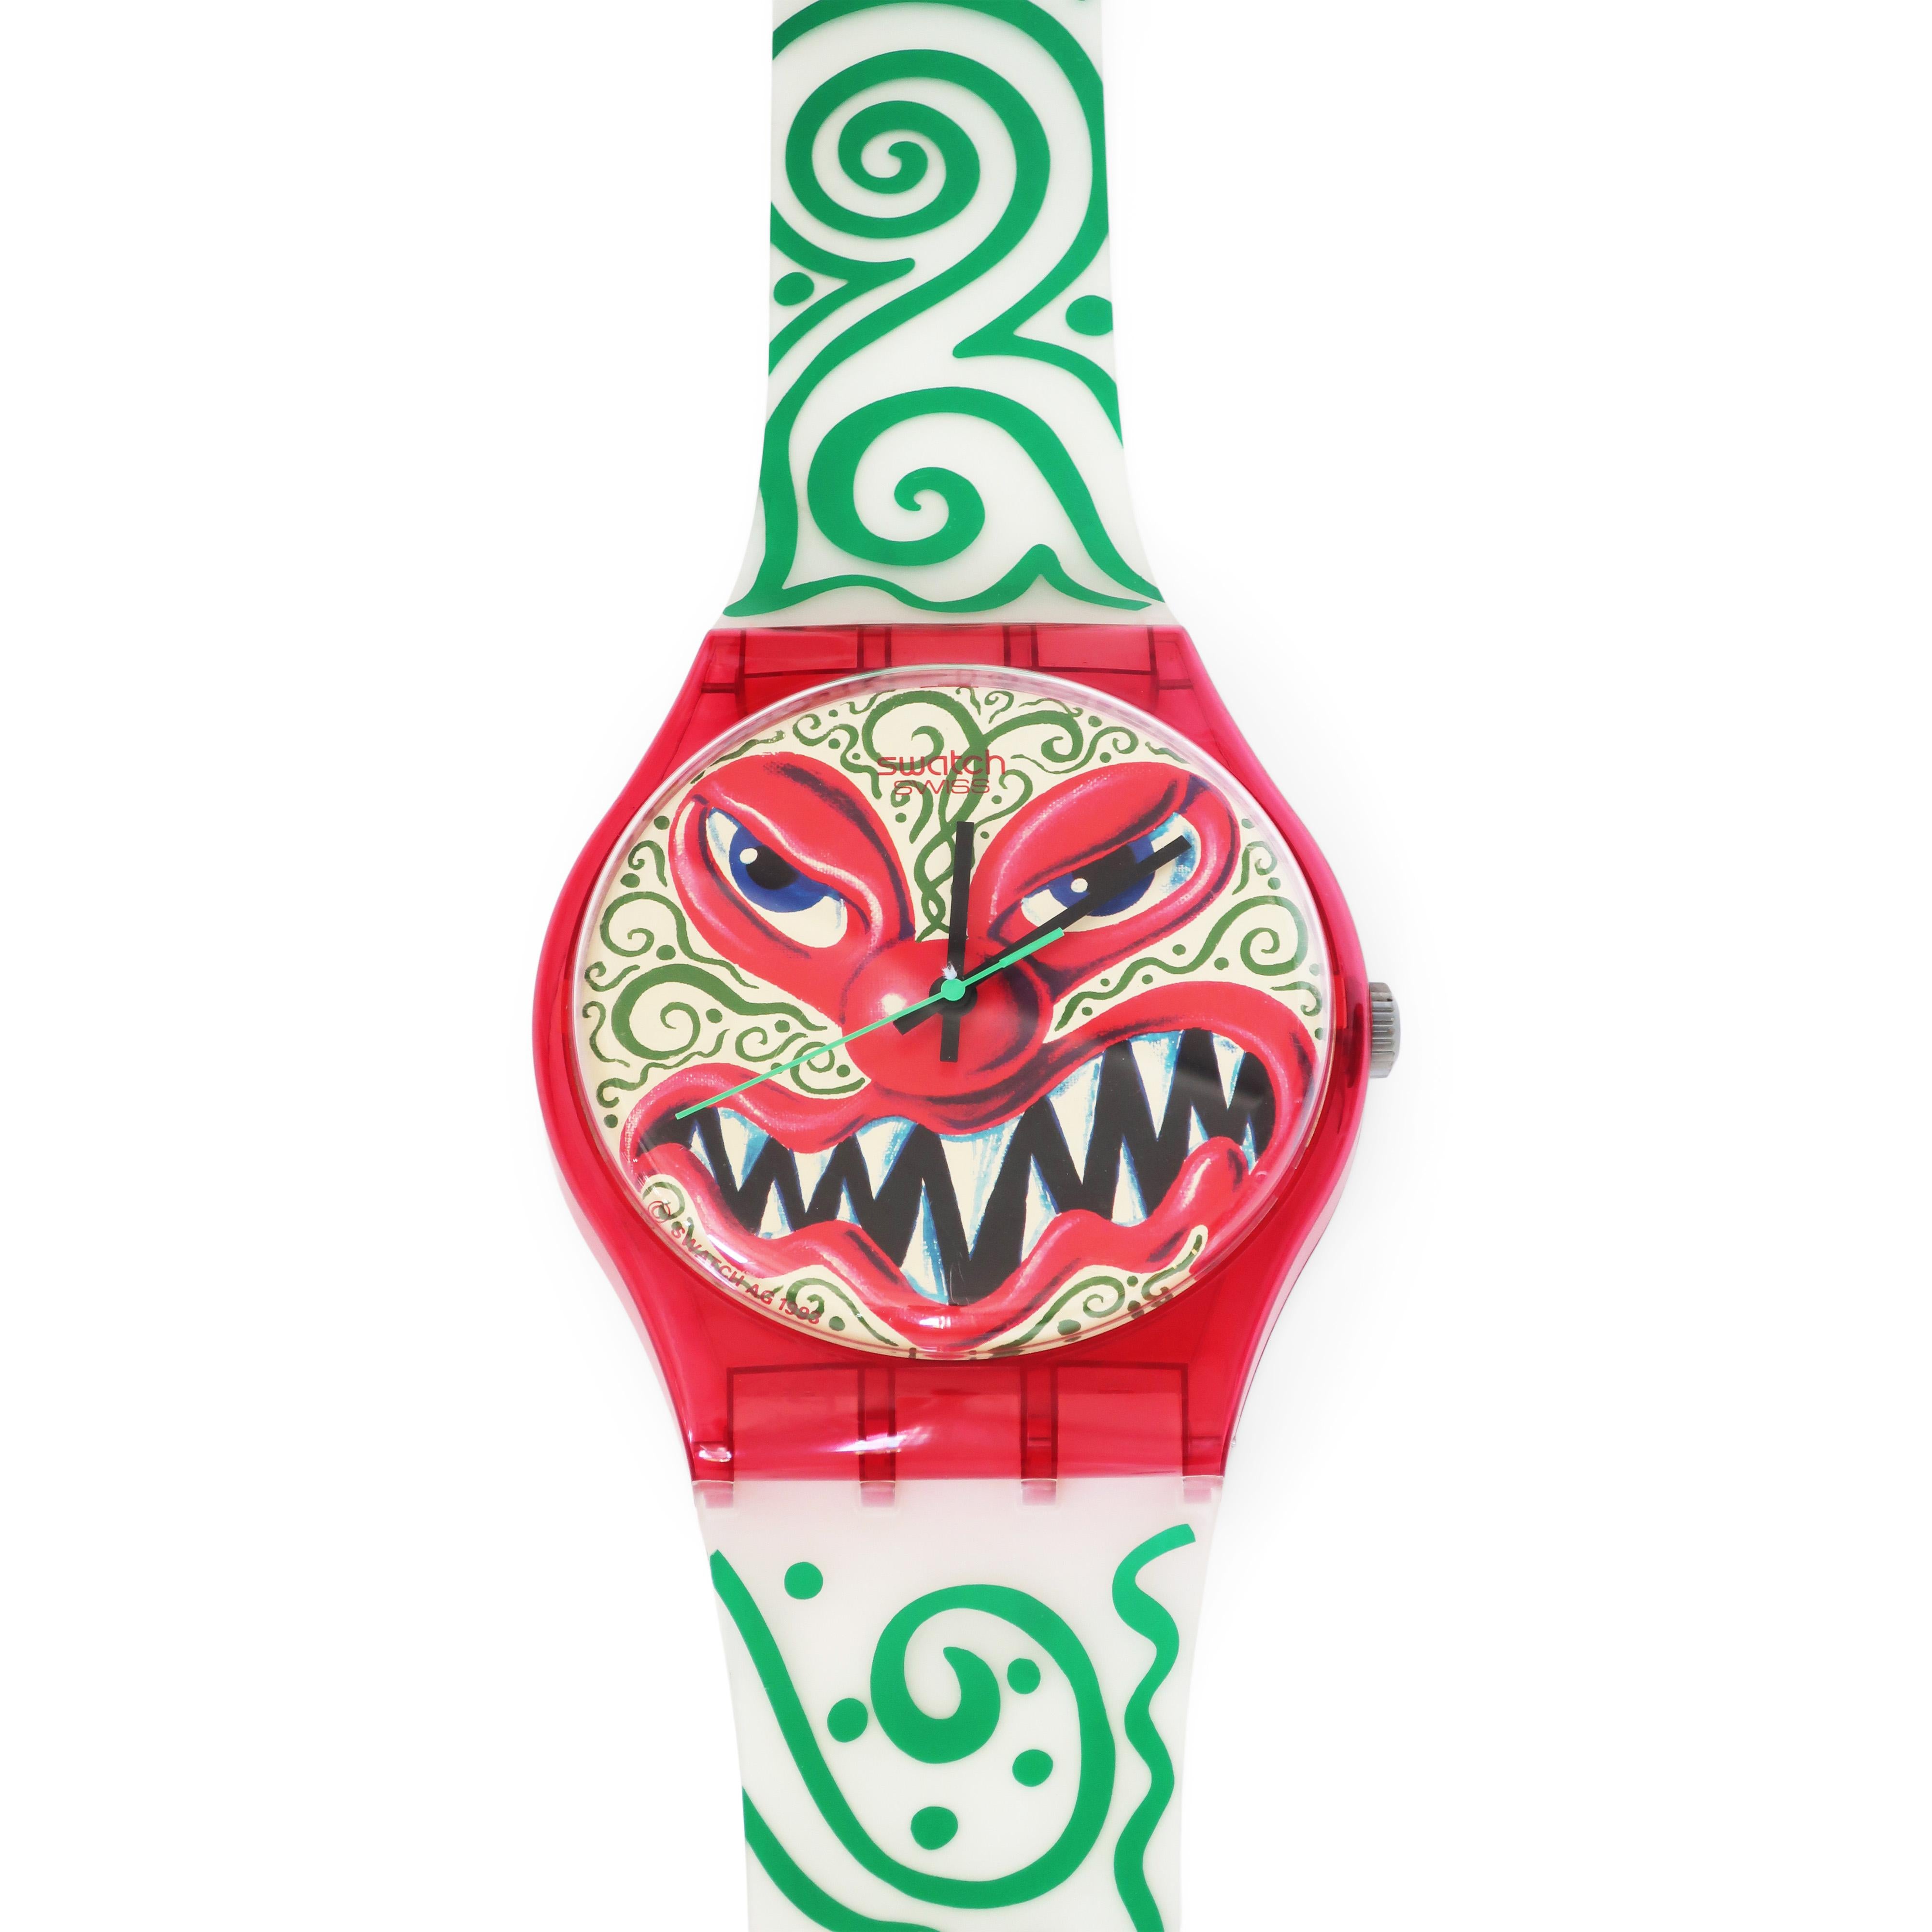 Post-Modern 1993 “Monster Time” Wristwatch Wall Clock by Kenny Scharf for Swatch 